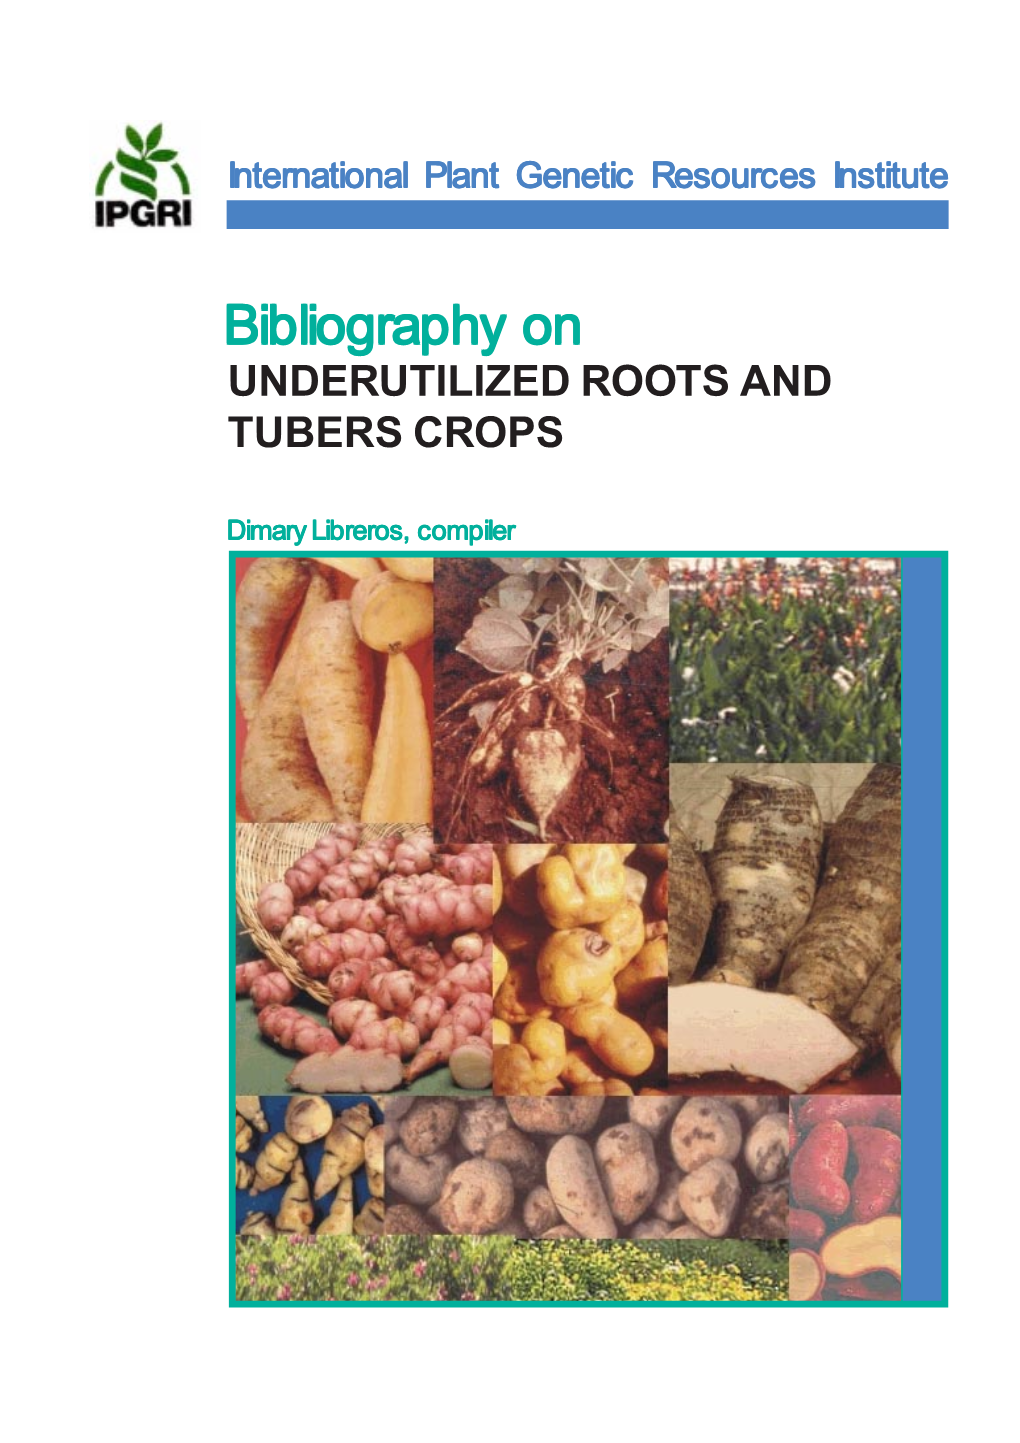 Bibliography on UNDERUTILIZED ROOTS and TUBERS CROPS